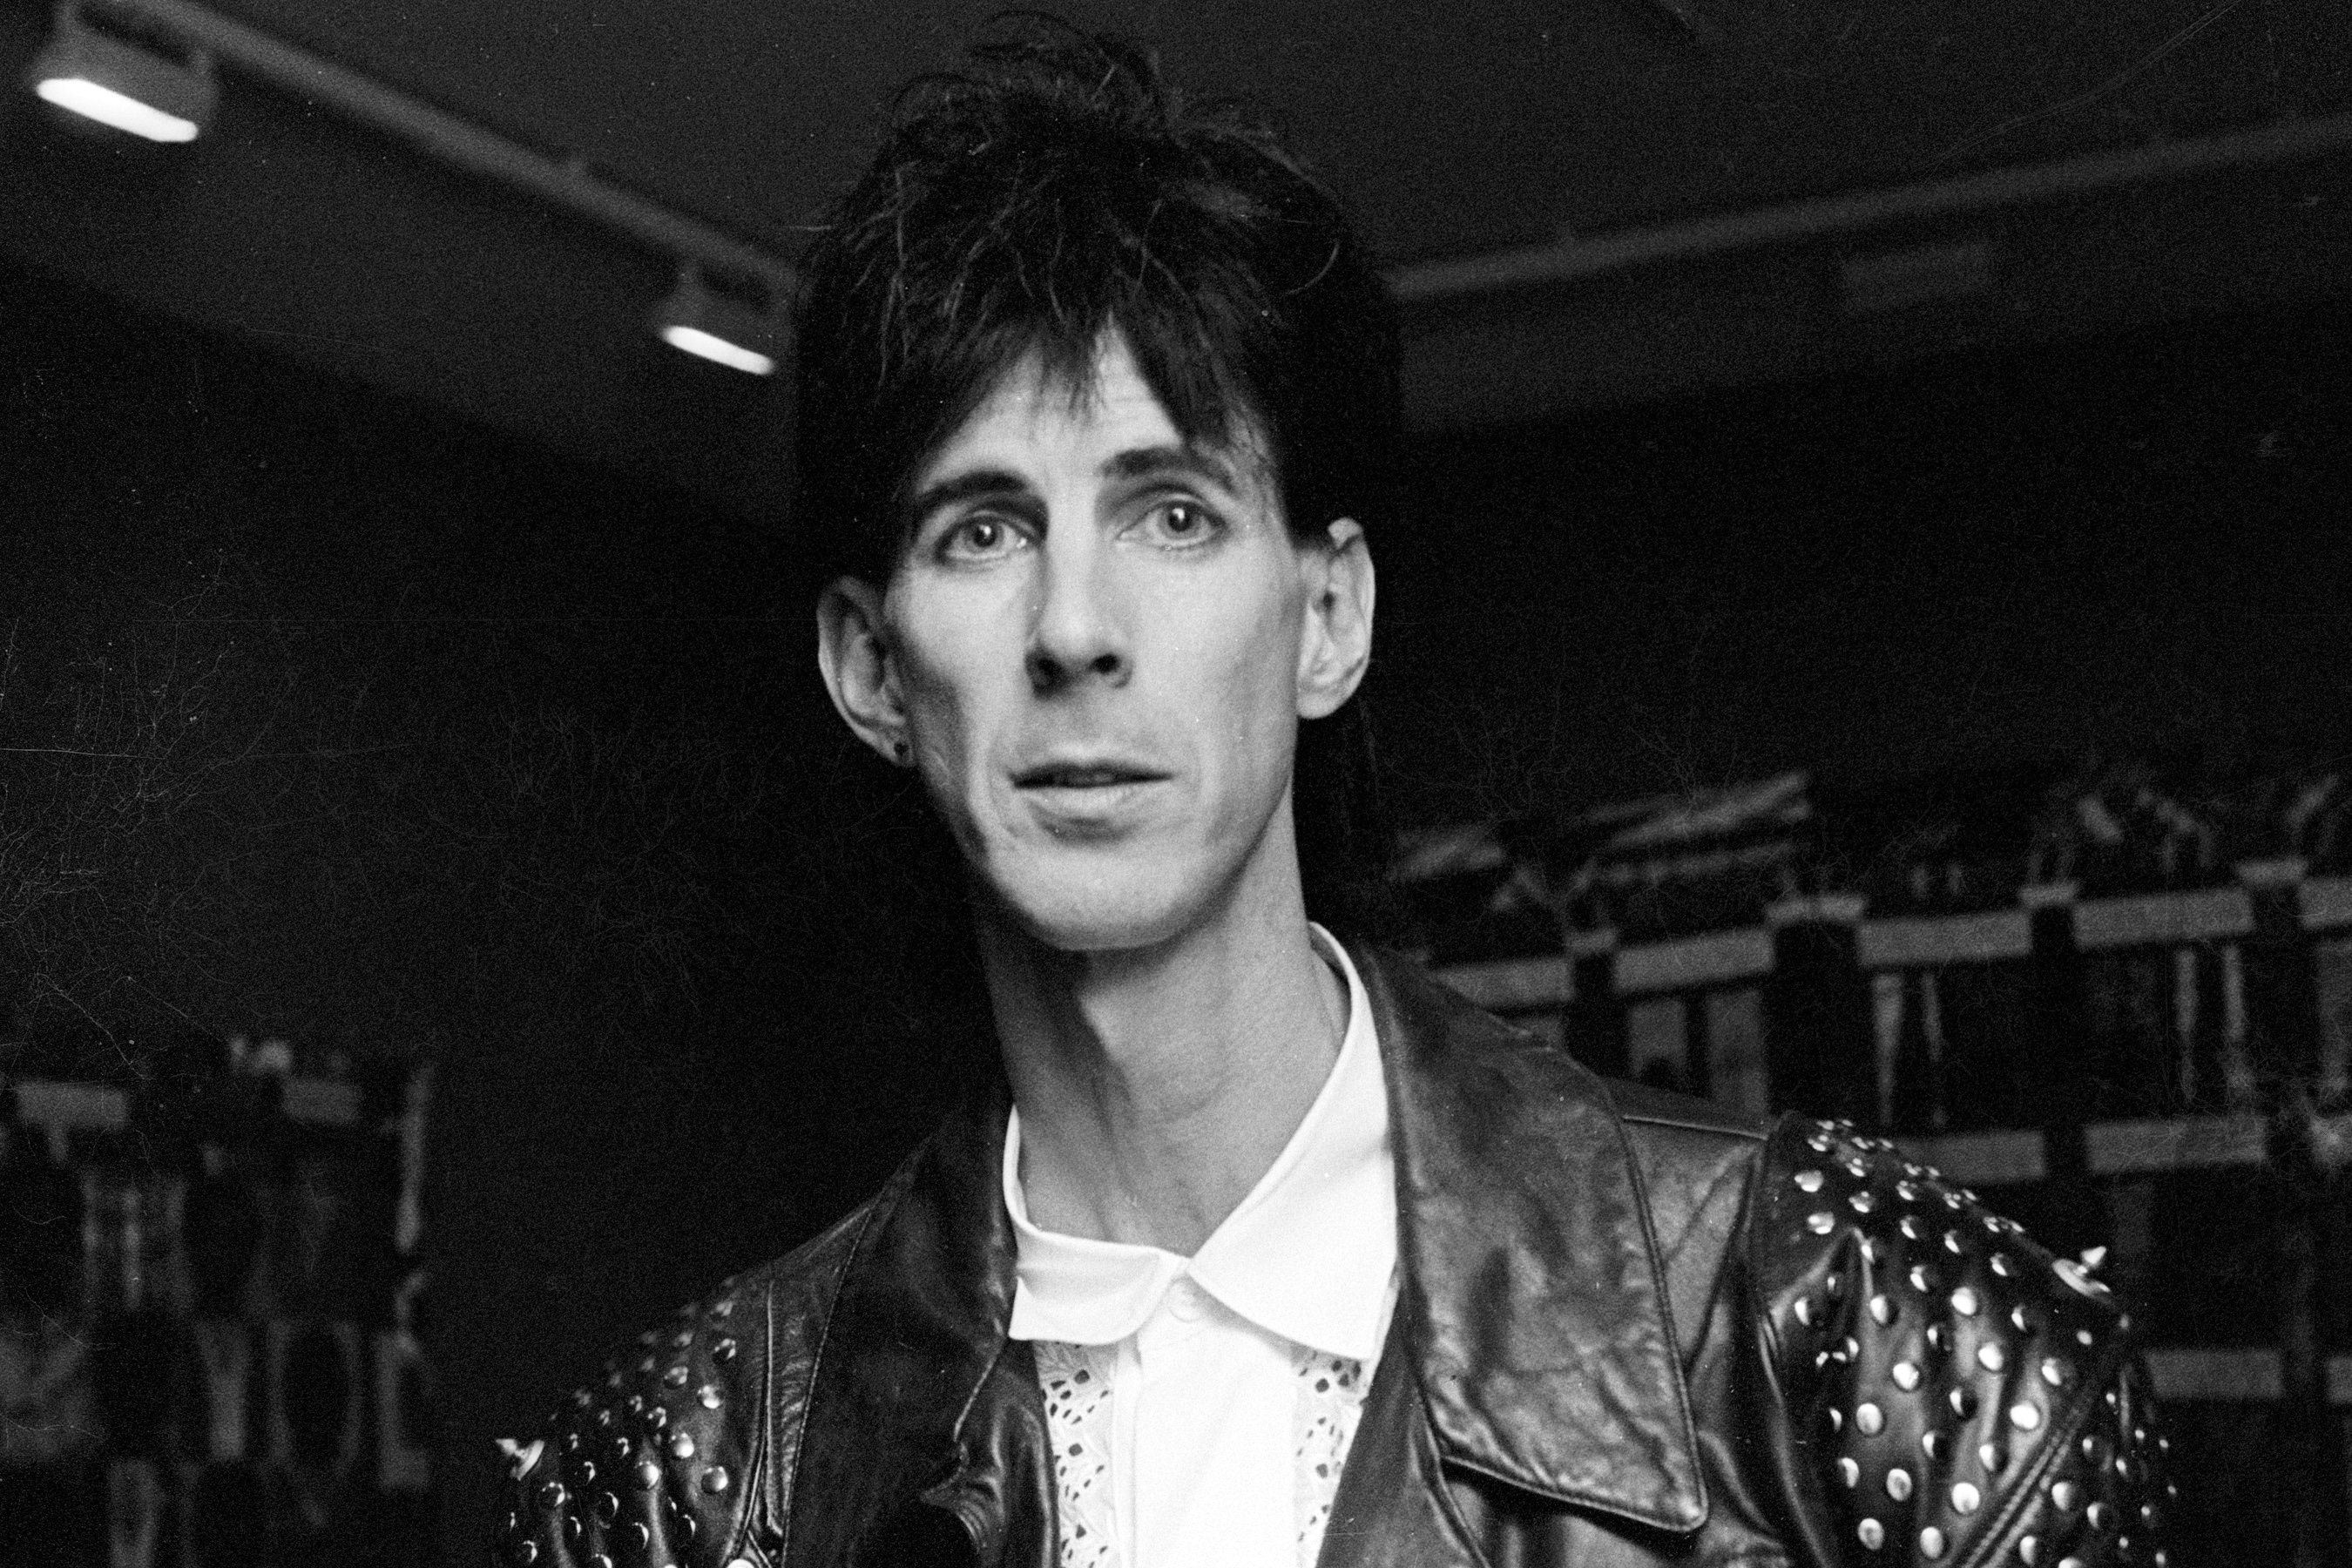 How Did Ric Ocasek Die? New Details On Mysterious Death Of Rock'n'Roll Legend At 75